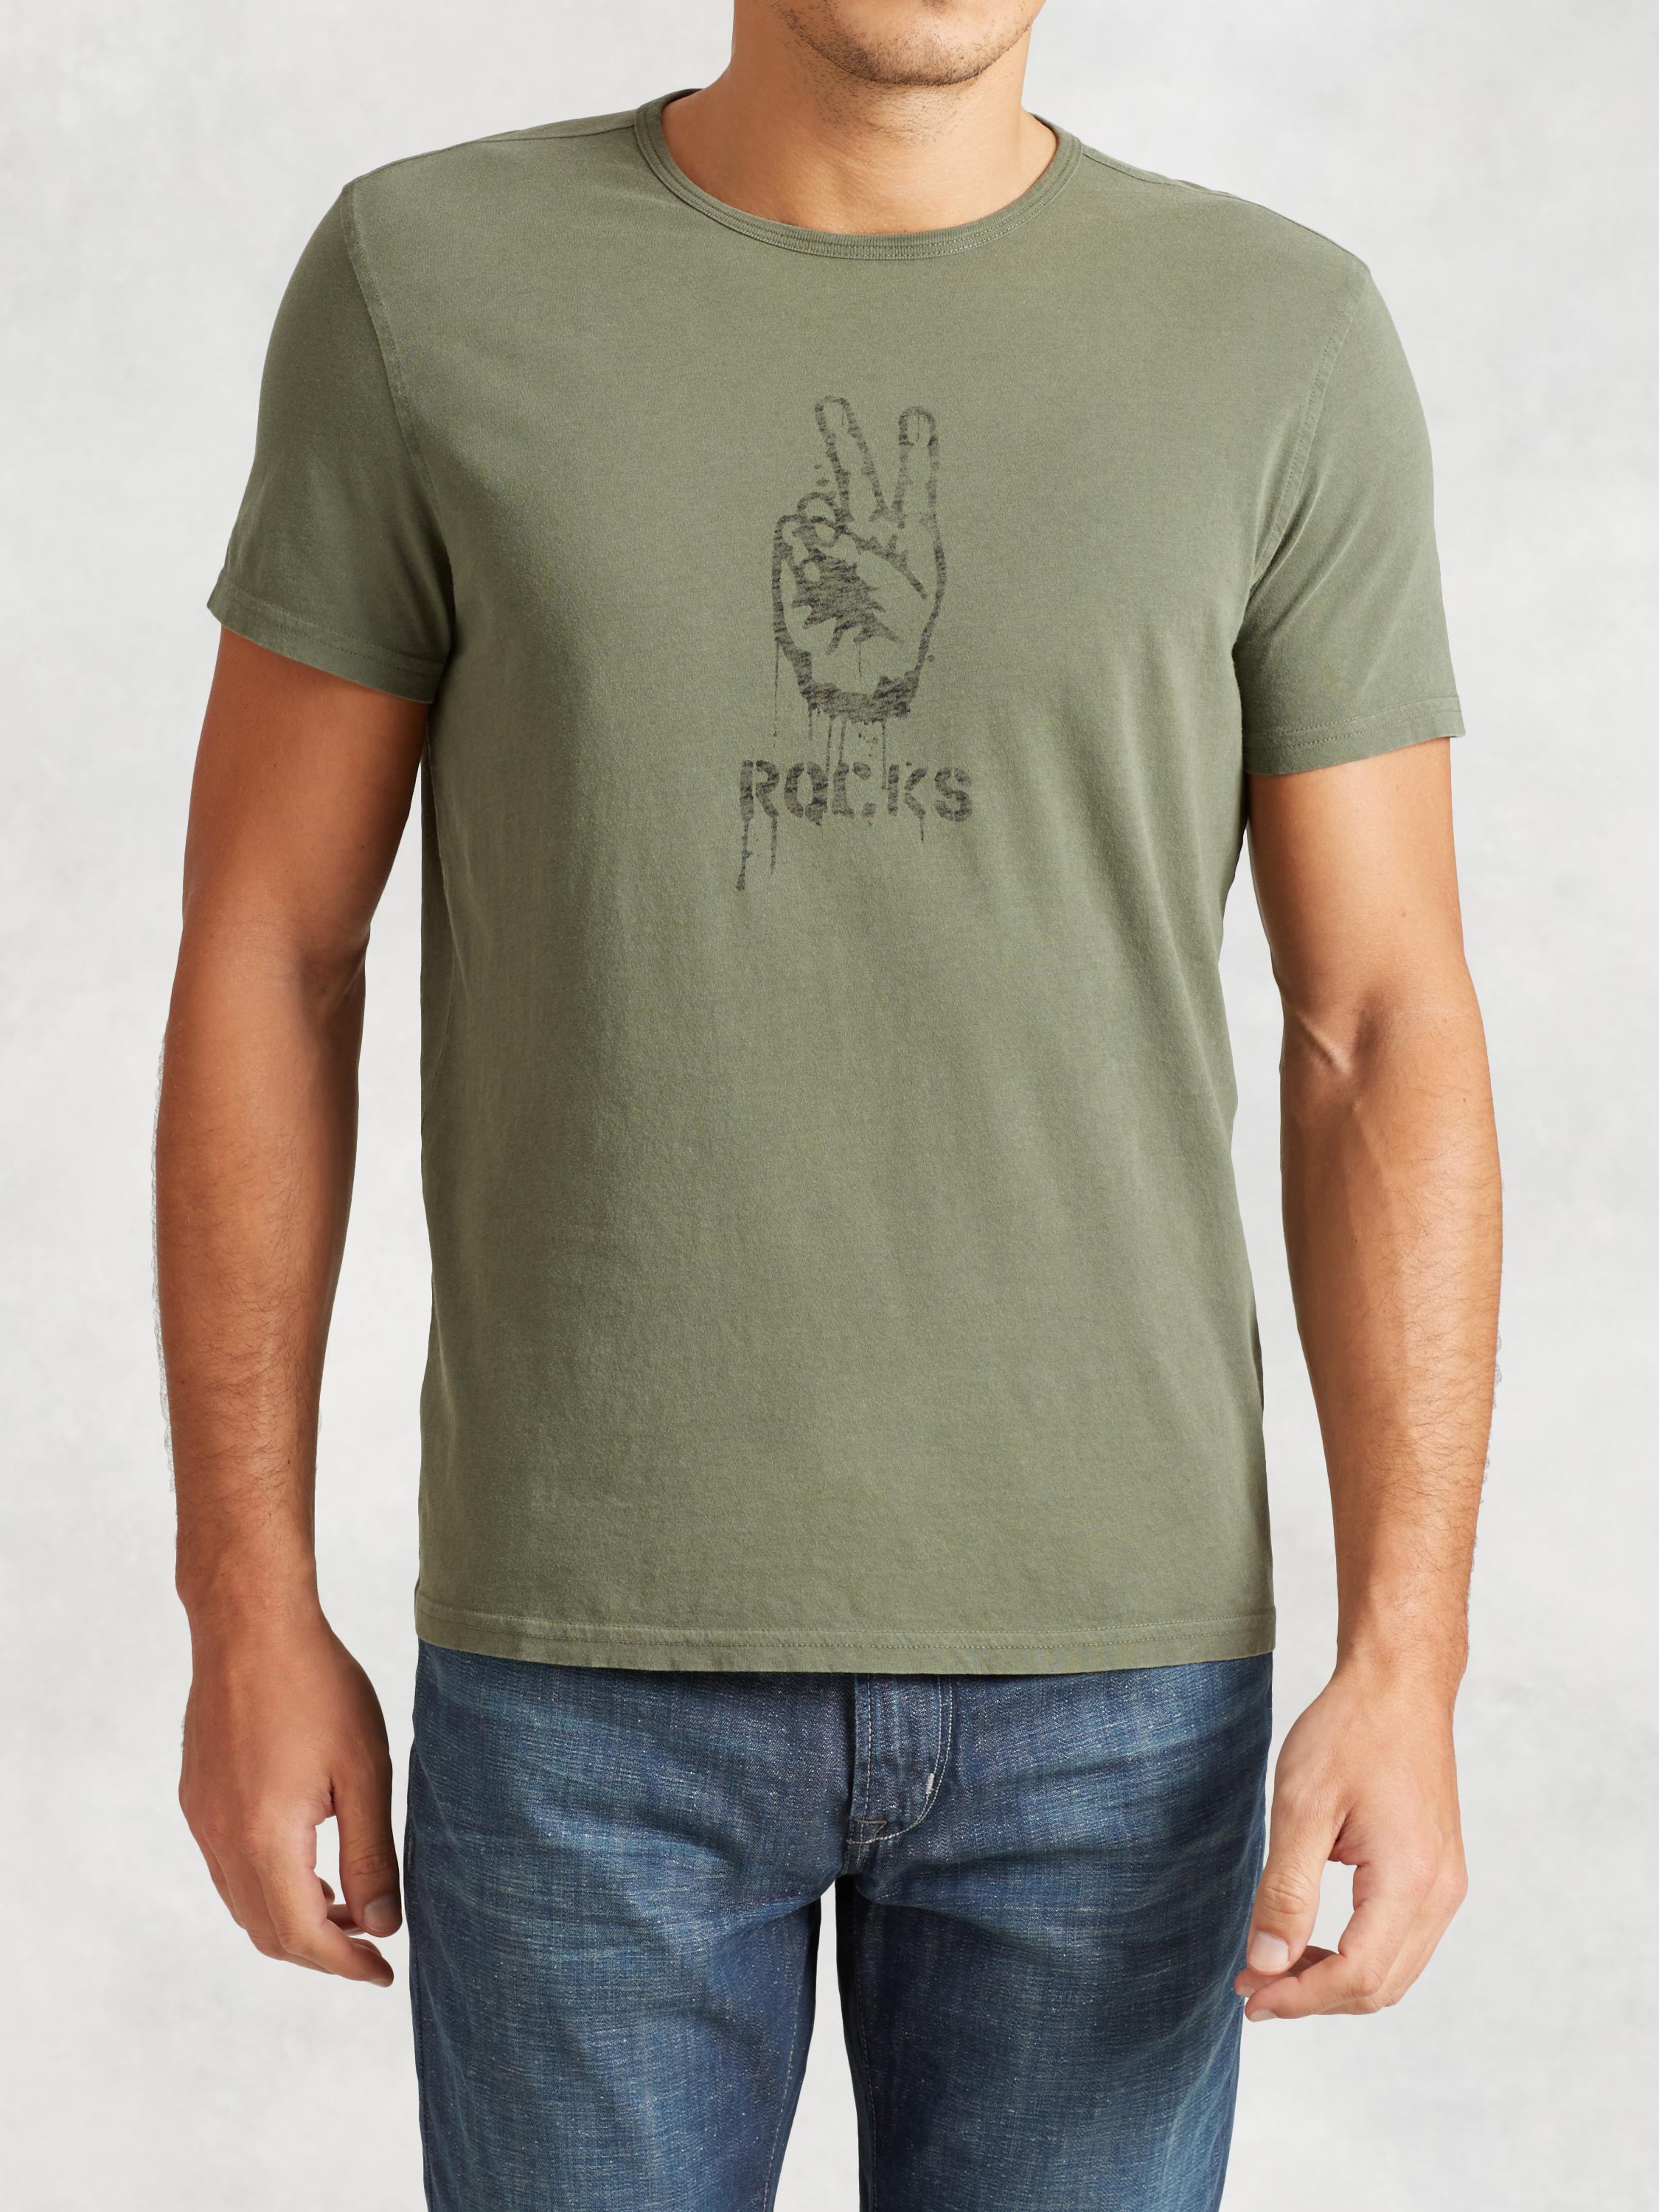 Peace Rocks Graphic Tee image number 1